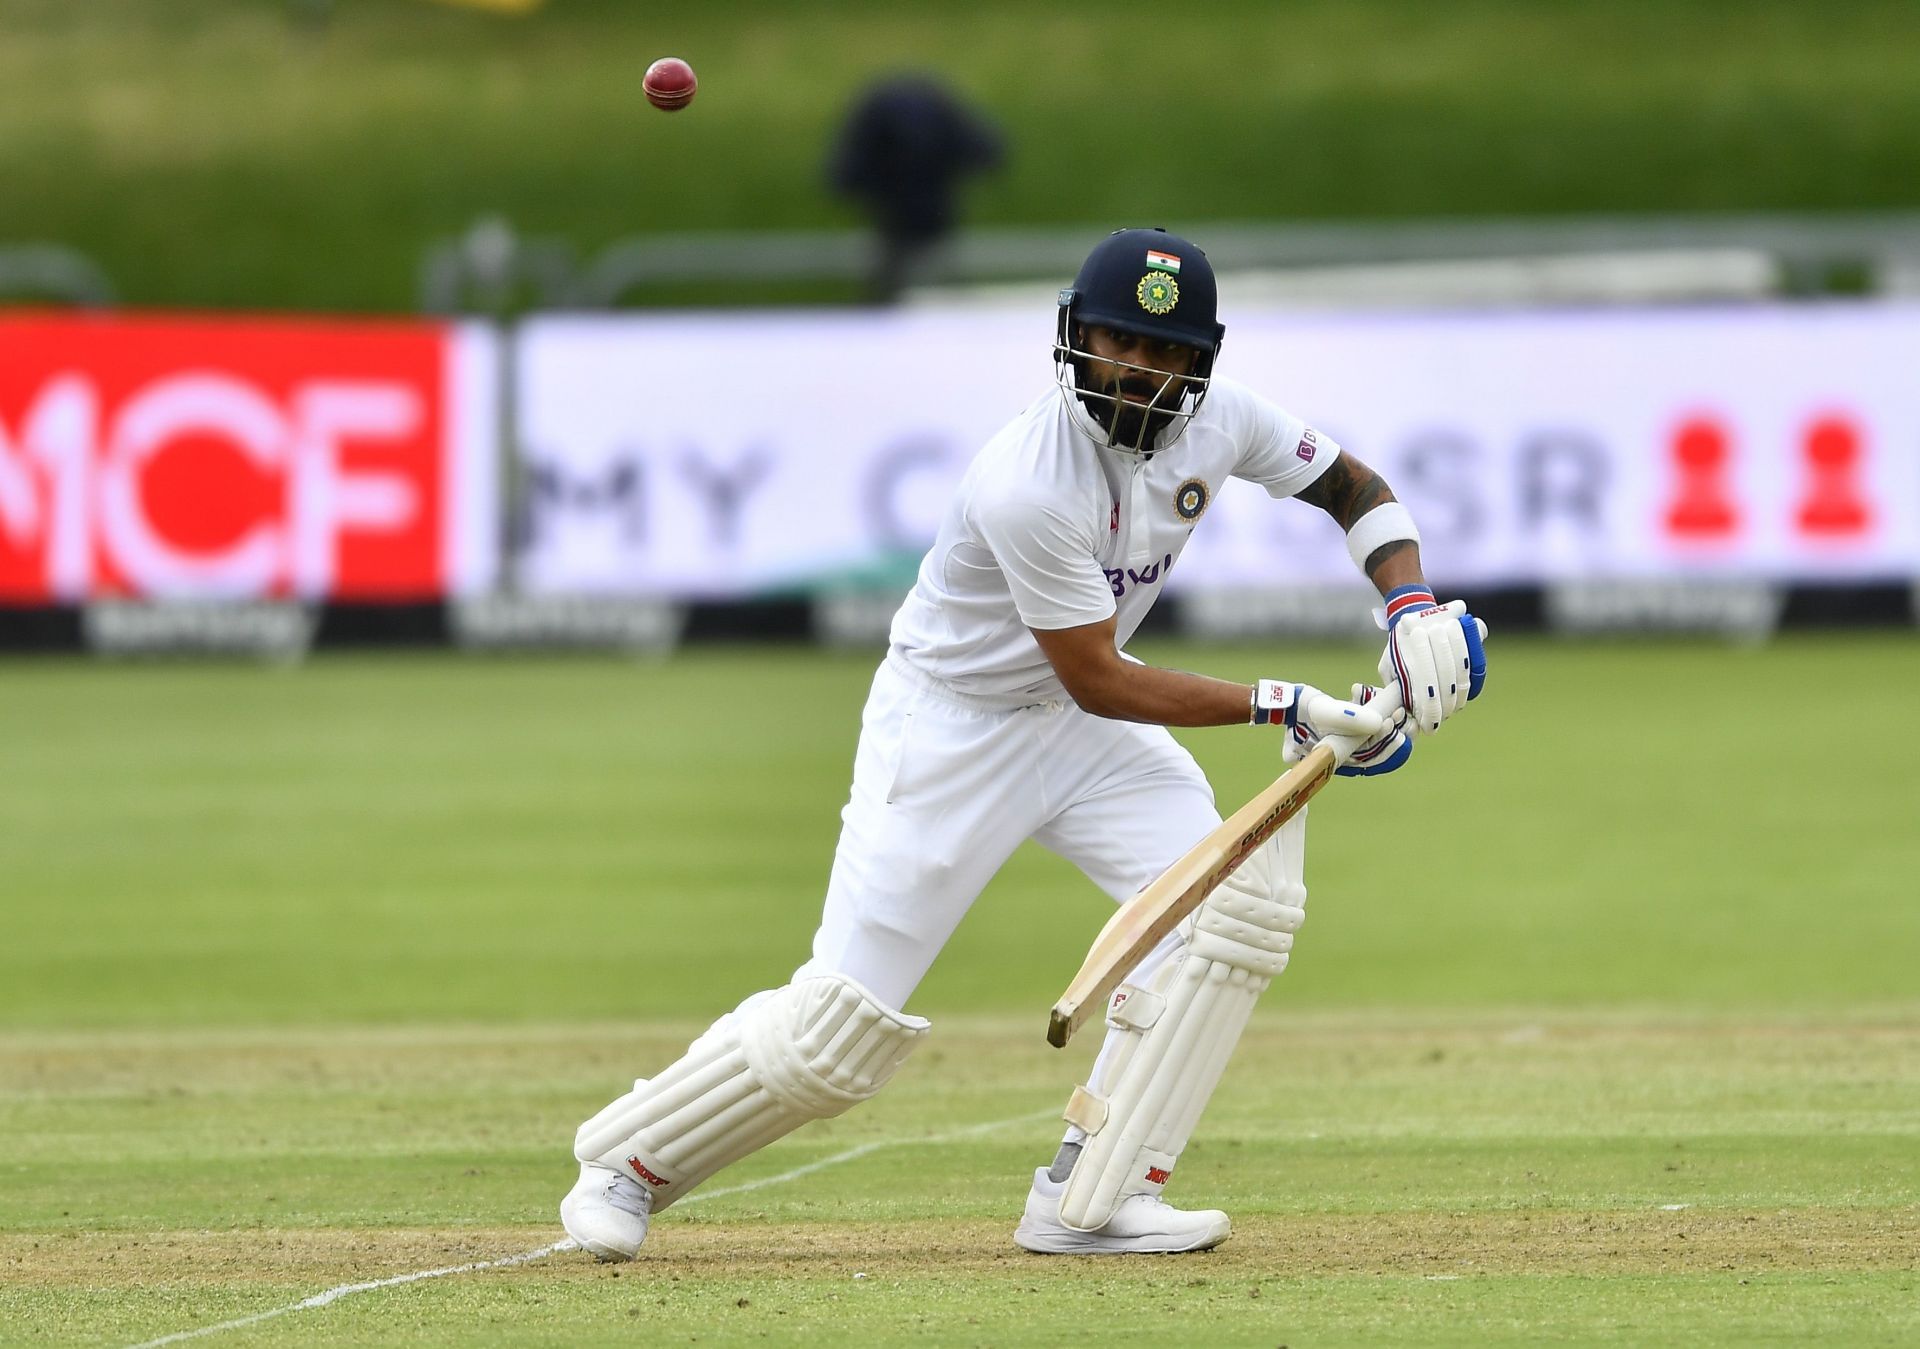 Virat Kohli will play his 100th Test match during the Test series between India and Sri Lanka